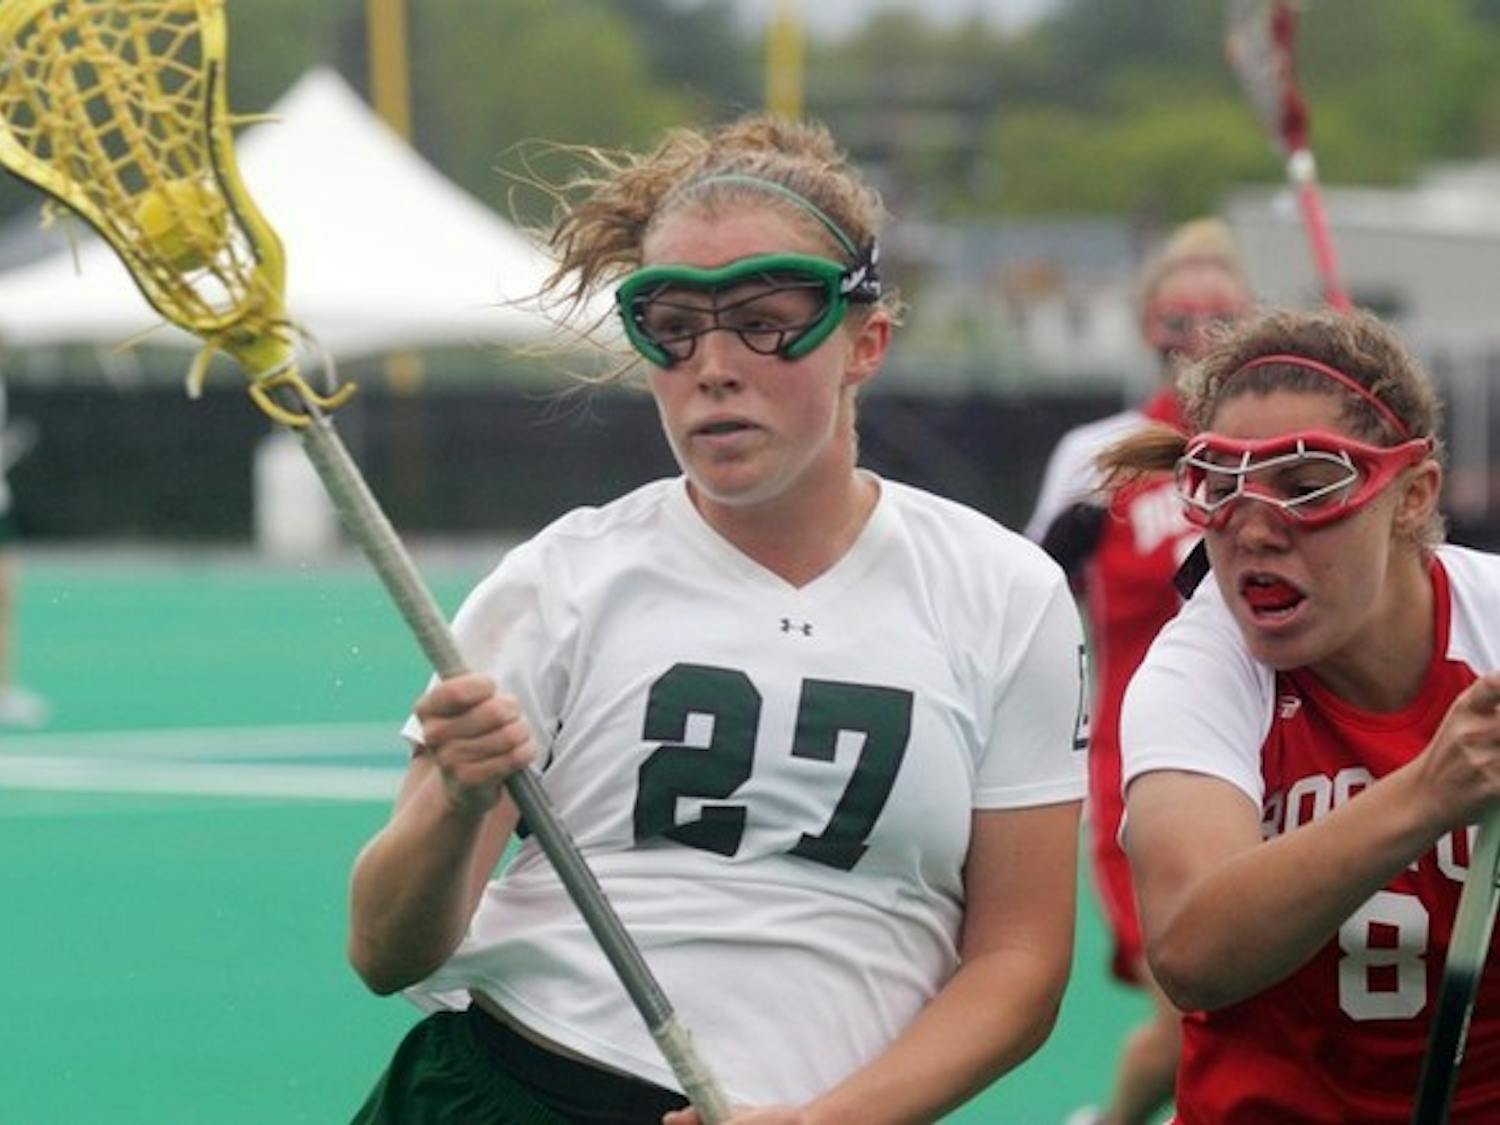 Whitney Douthett '07 notched two goals and two assists in the Big Green's 9-4 thumping of BU Sunday.